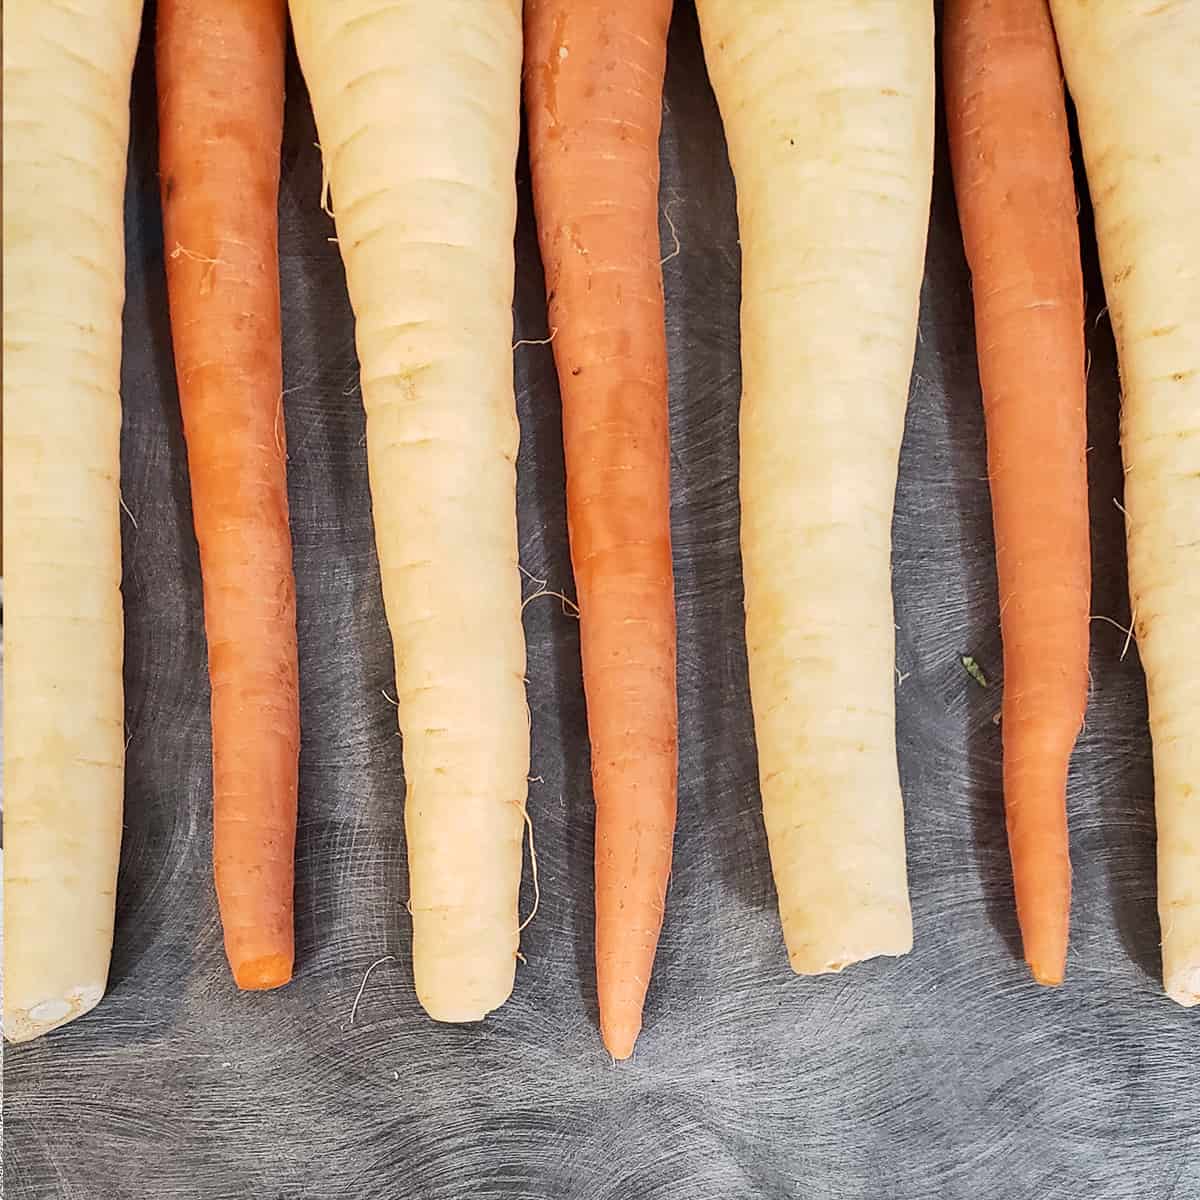 How to Dehydrate Parsnips & Carrots